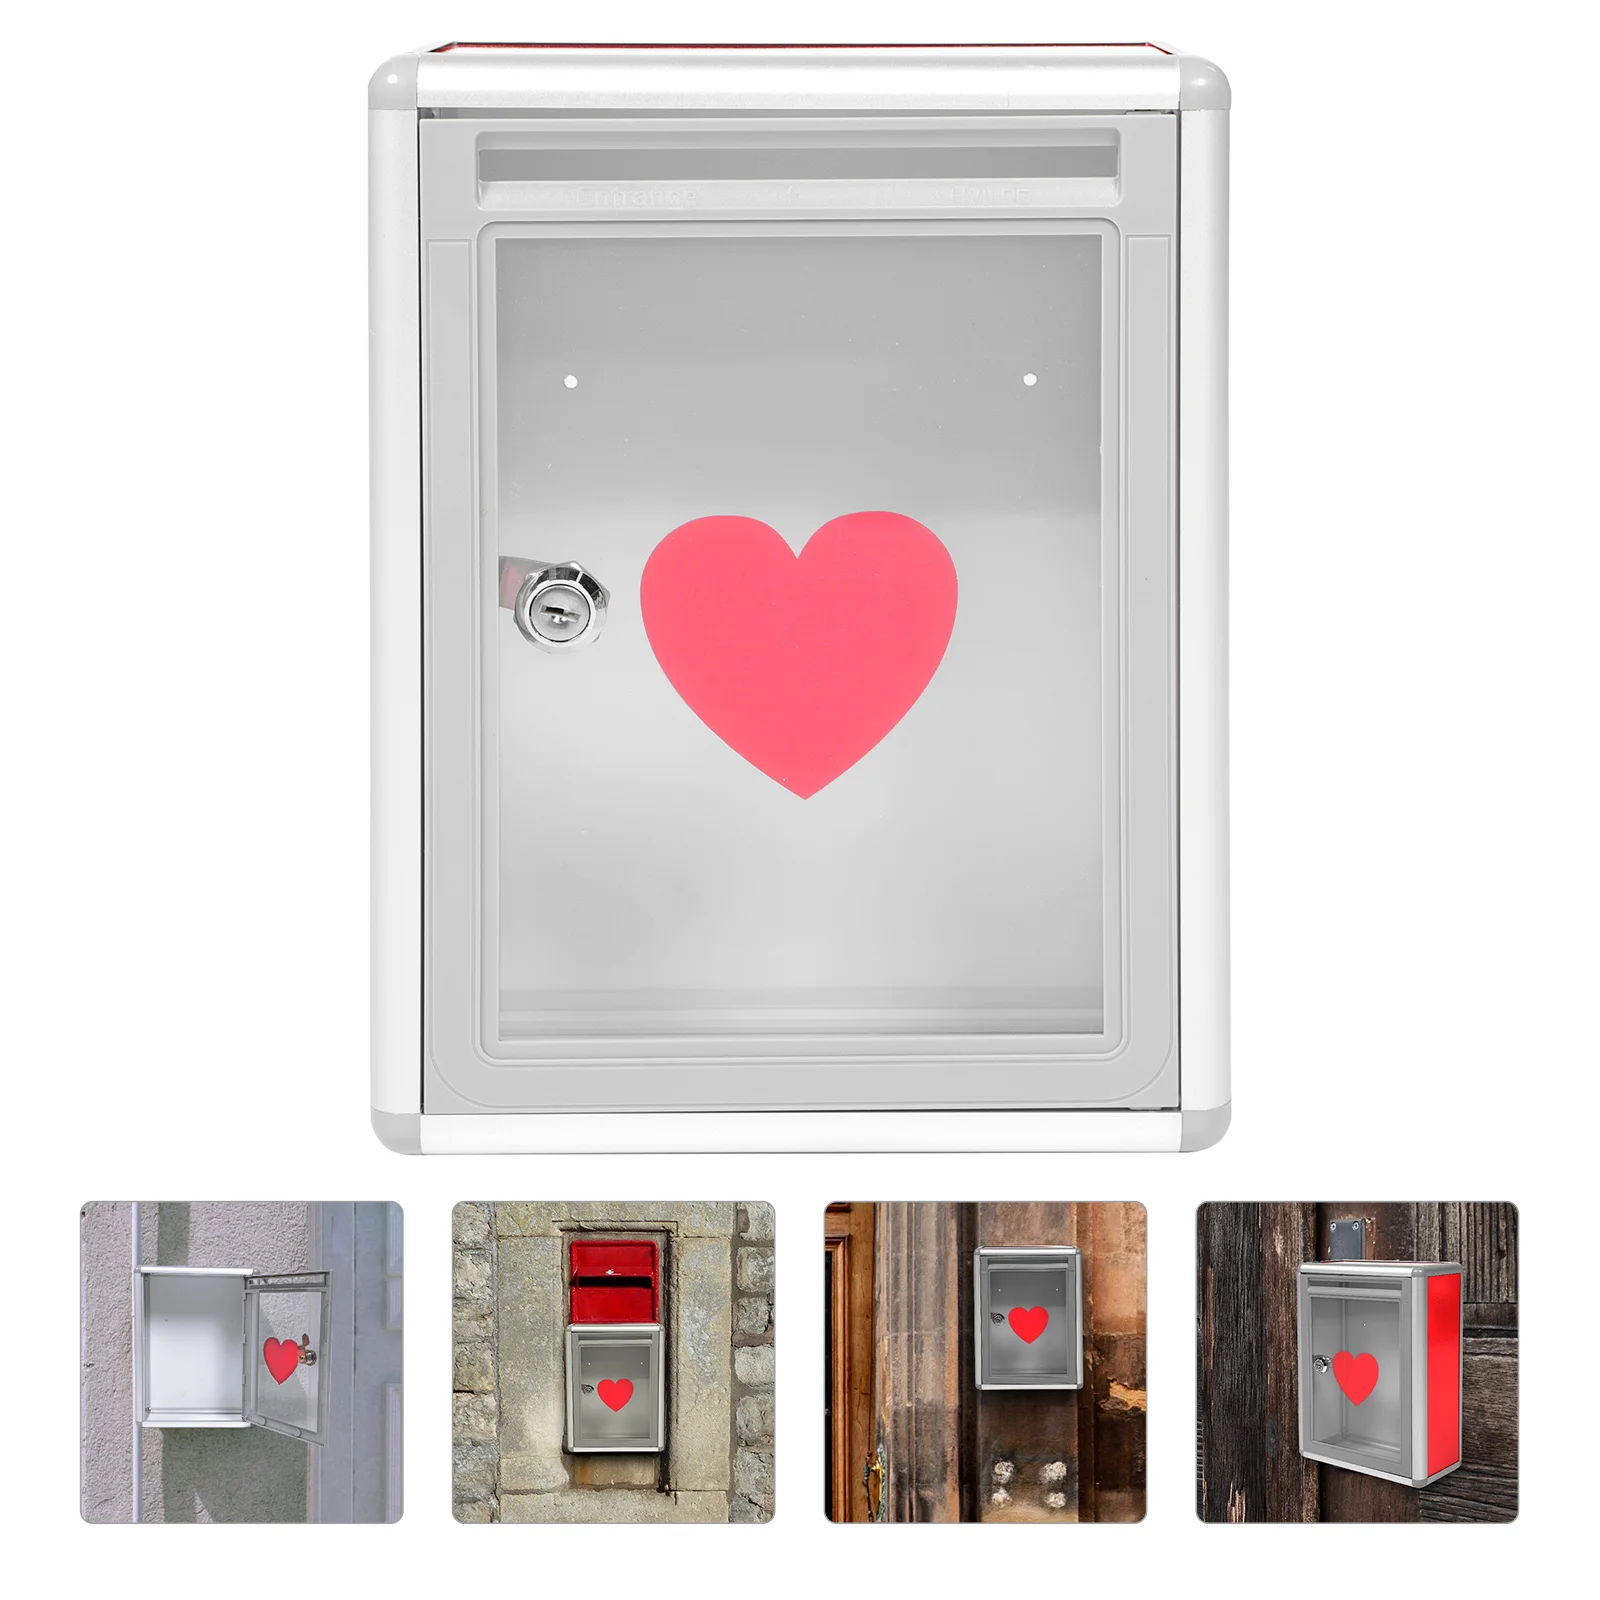 

Box Donation Mailbox Suggestion Ballot Wall Charity Collection Letter Acrylic Lock Drop Clear Post Mail Holder Boxes Metal